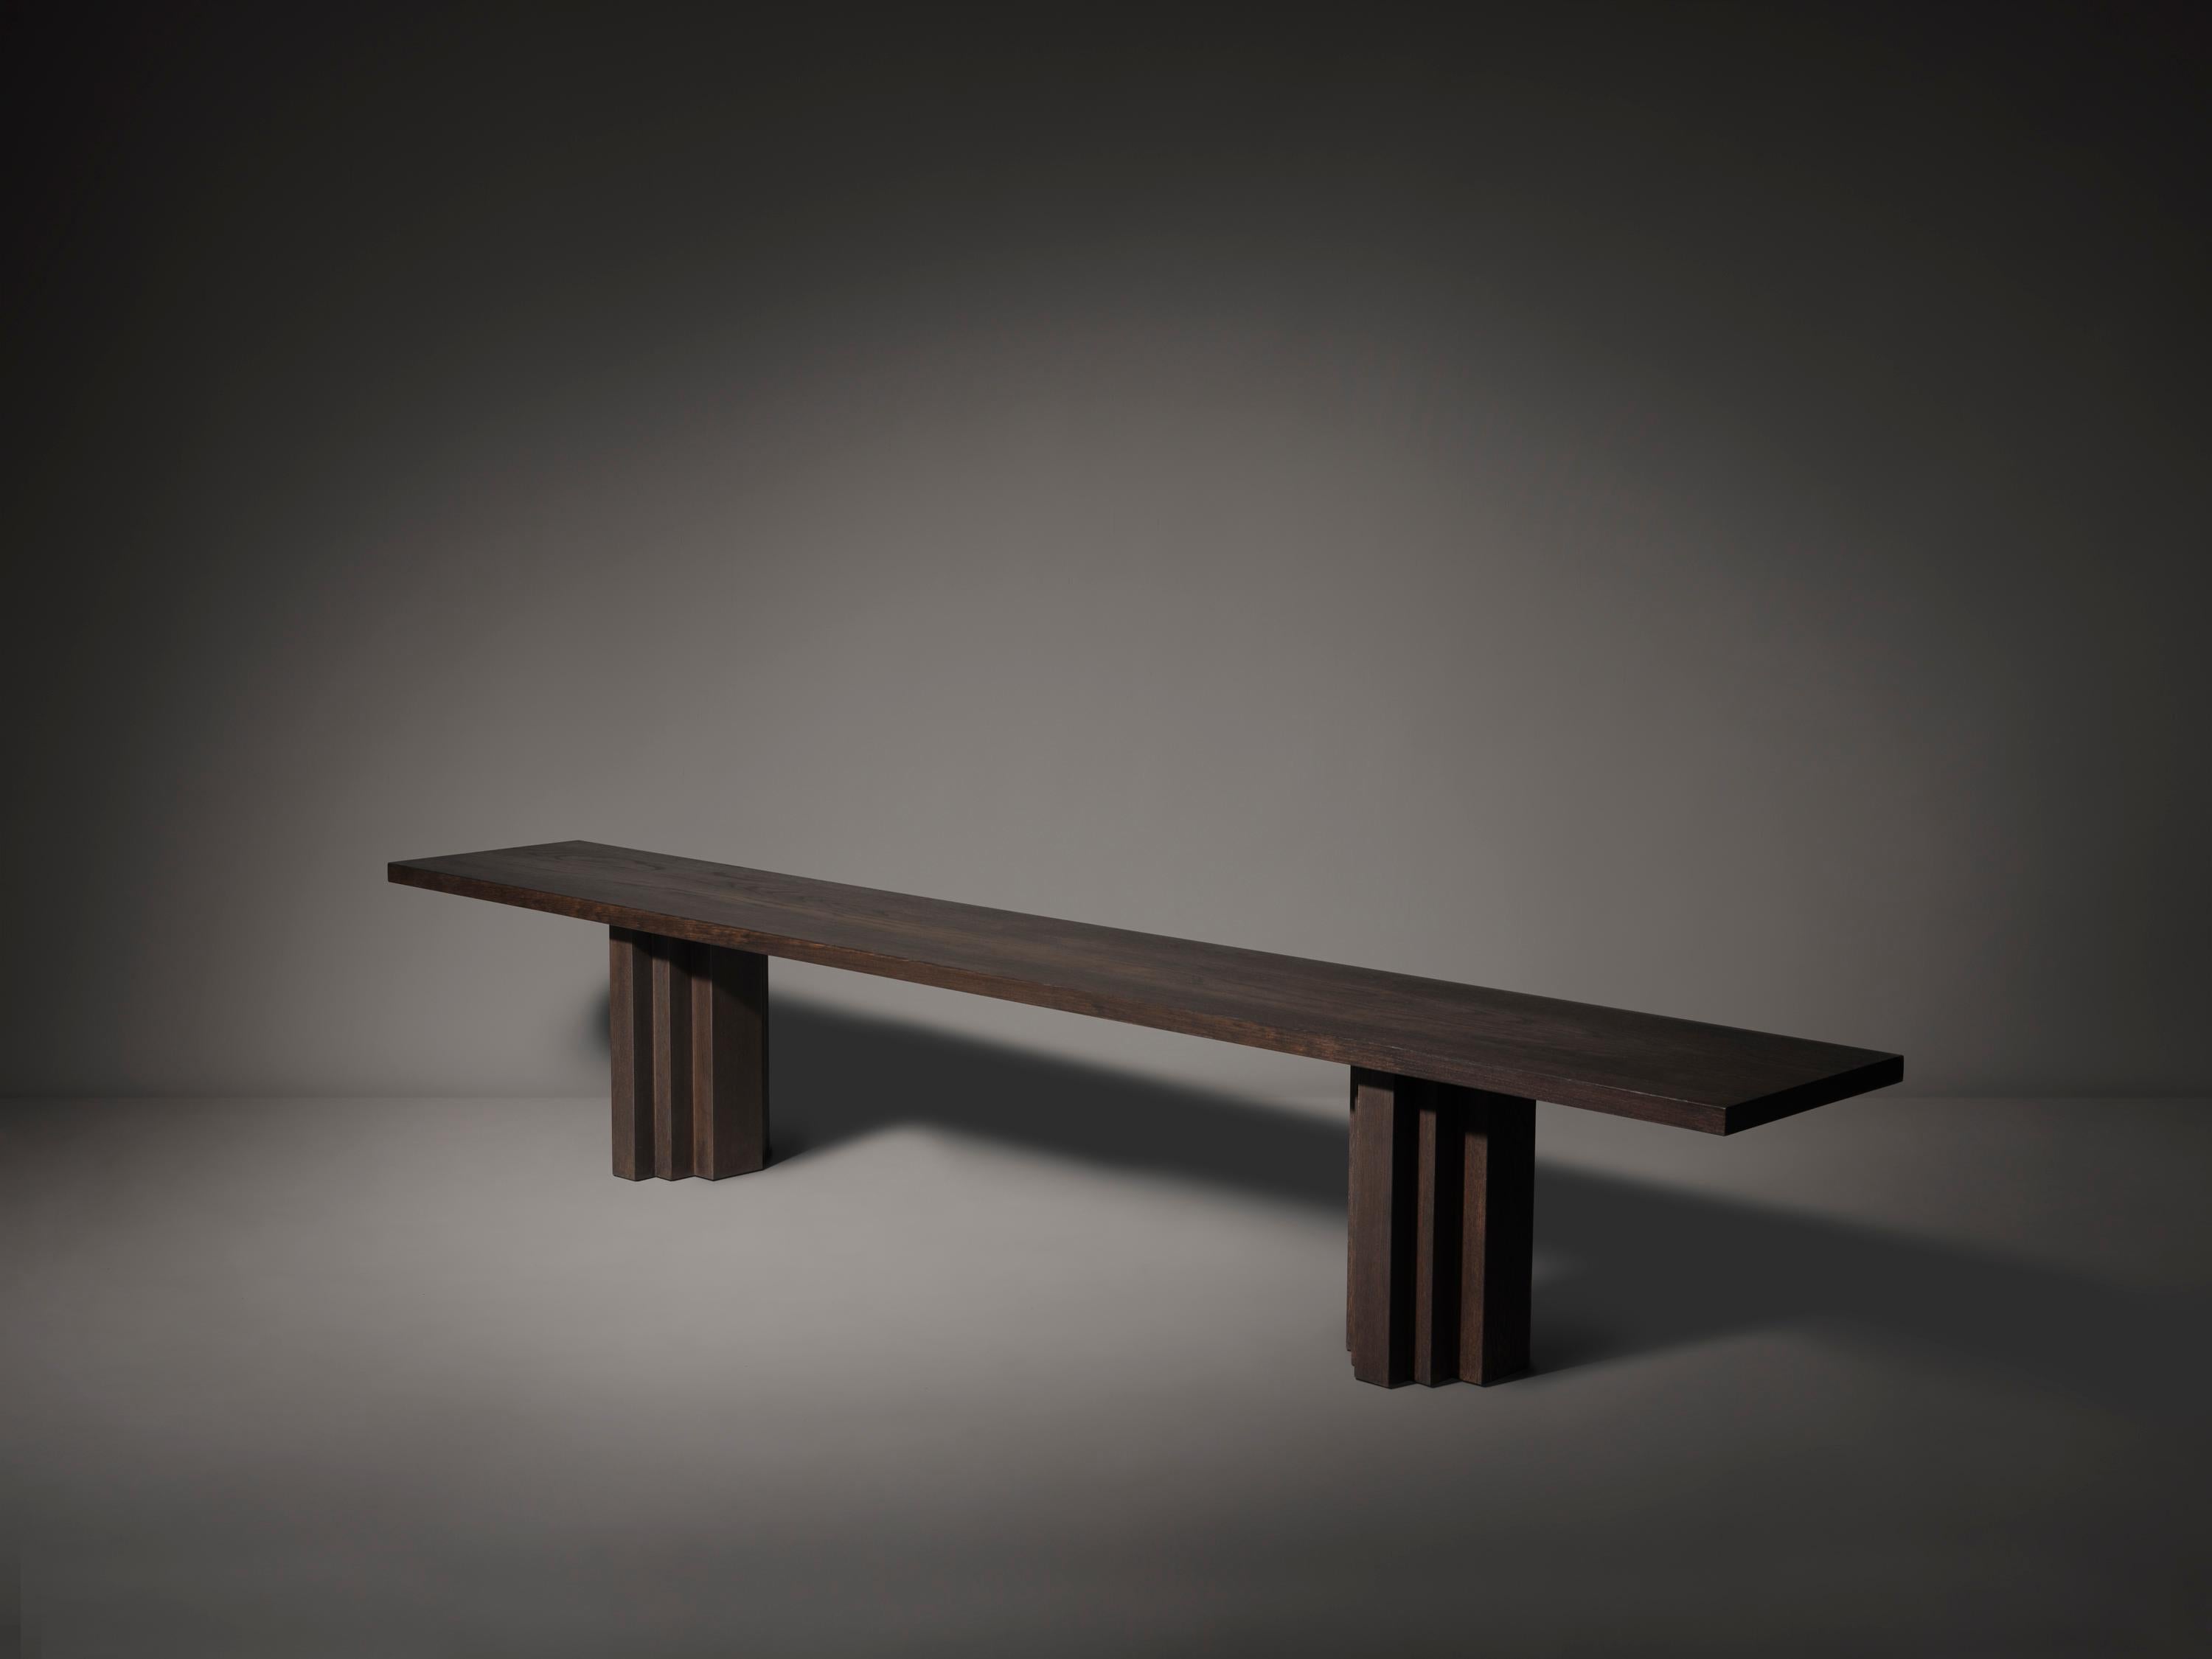 The Brut Slim Bench takes cues from Brutalism and Amsterdam School architecture and is made out of solid hardwood. The bench is designed to match the Brut Slim dining table but is also available as a separate product. 

Mokko is an Amsterdam based